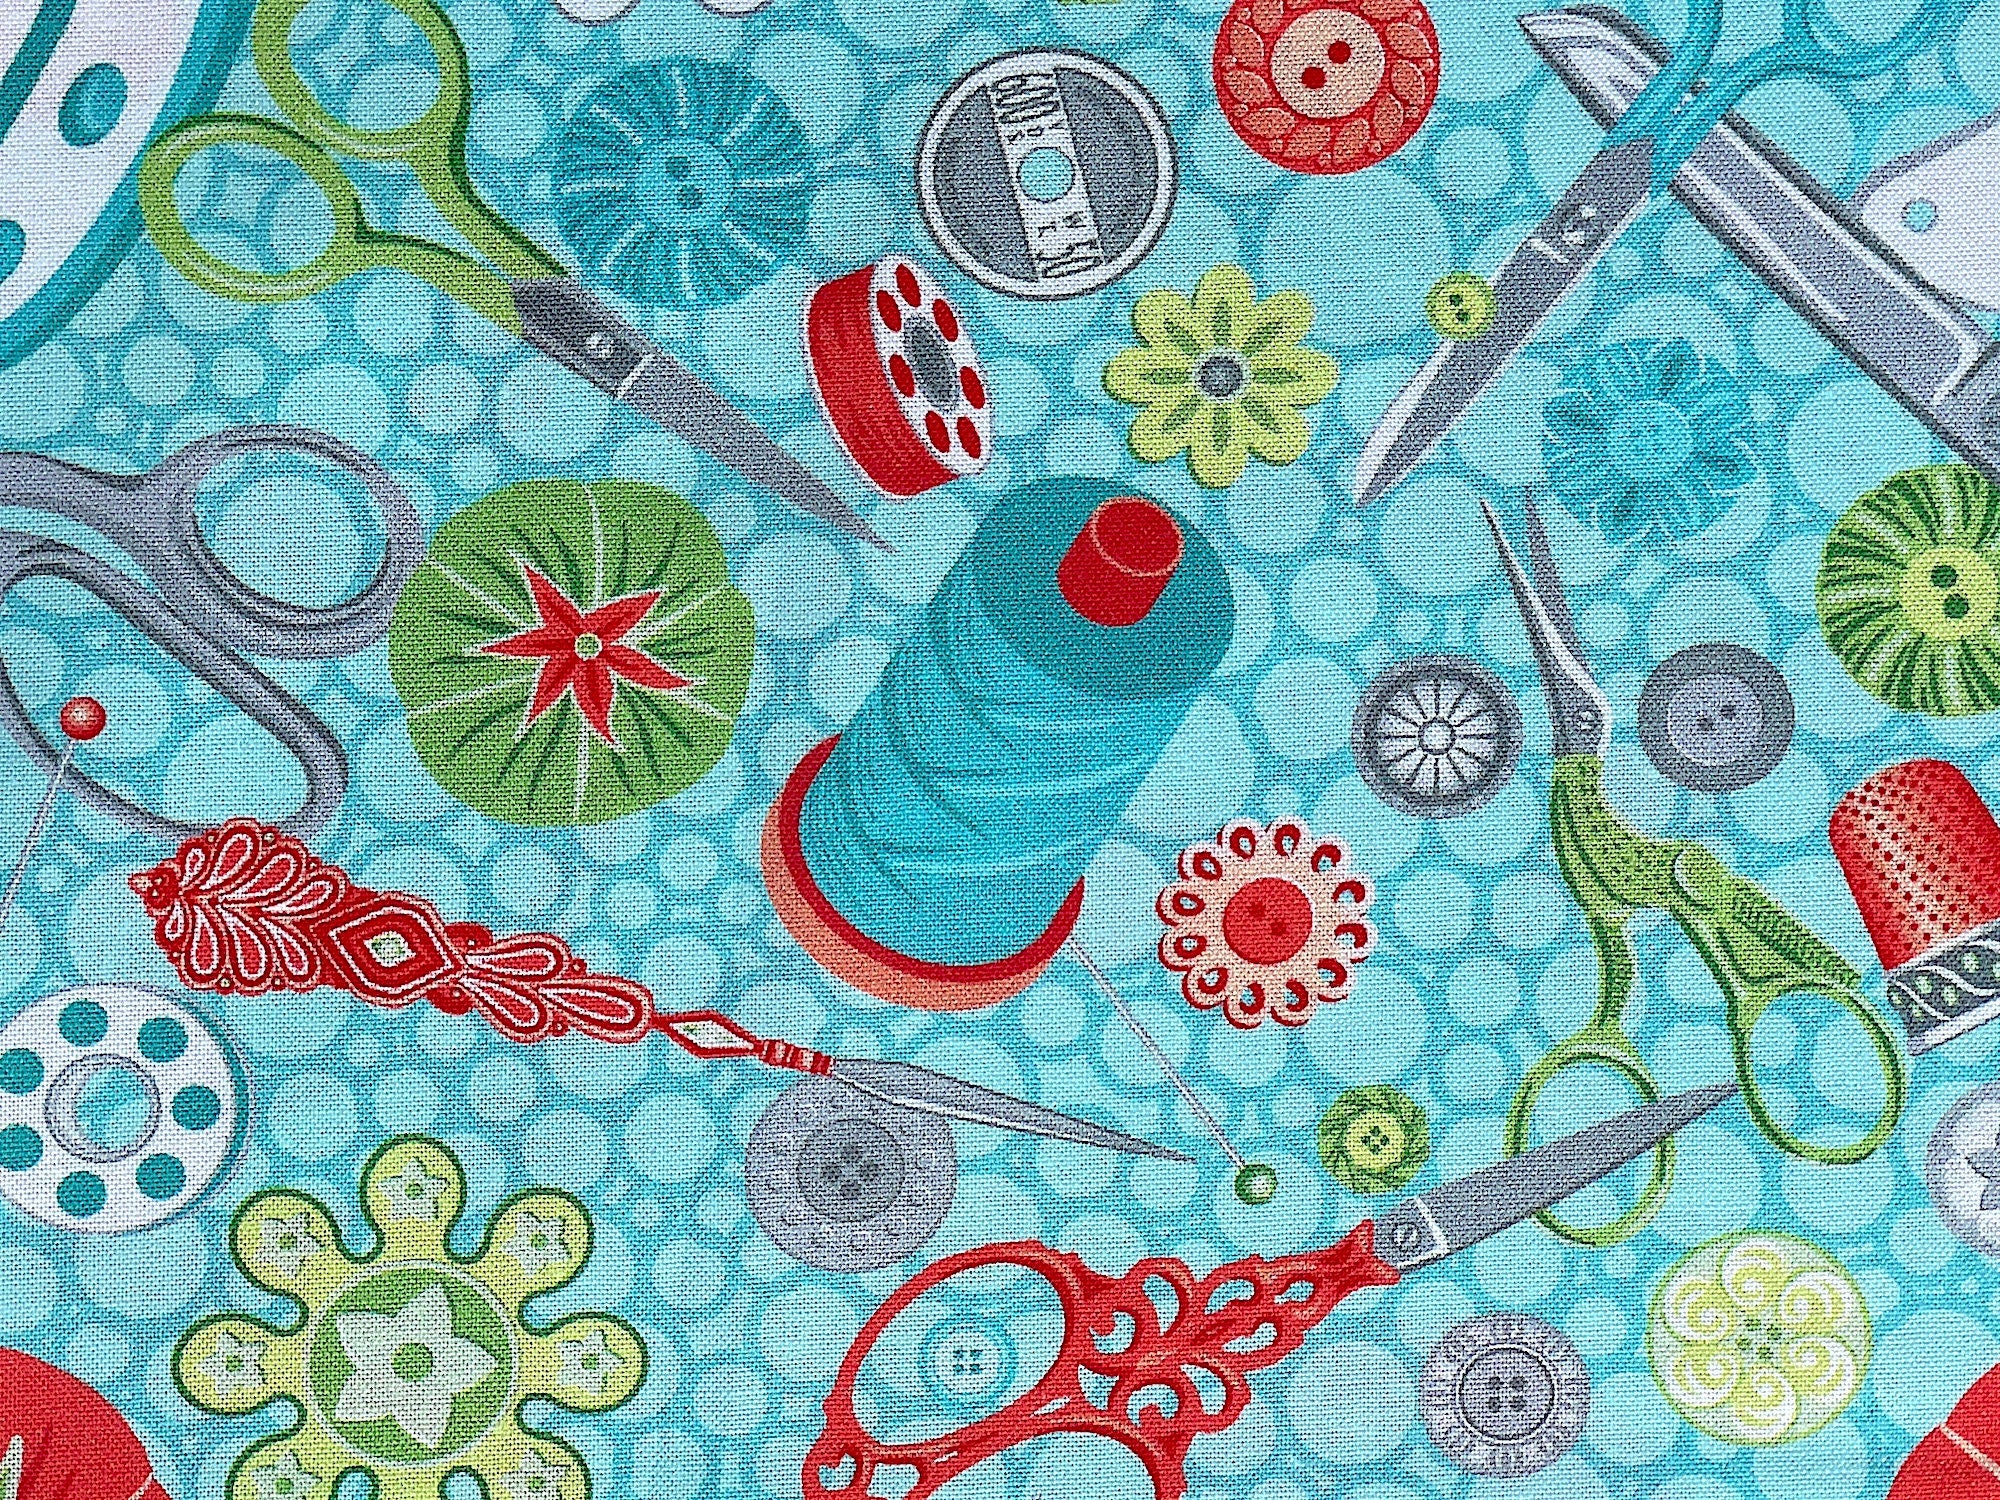 Close up of thread, pin cushions, scissors, buttons and more.